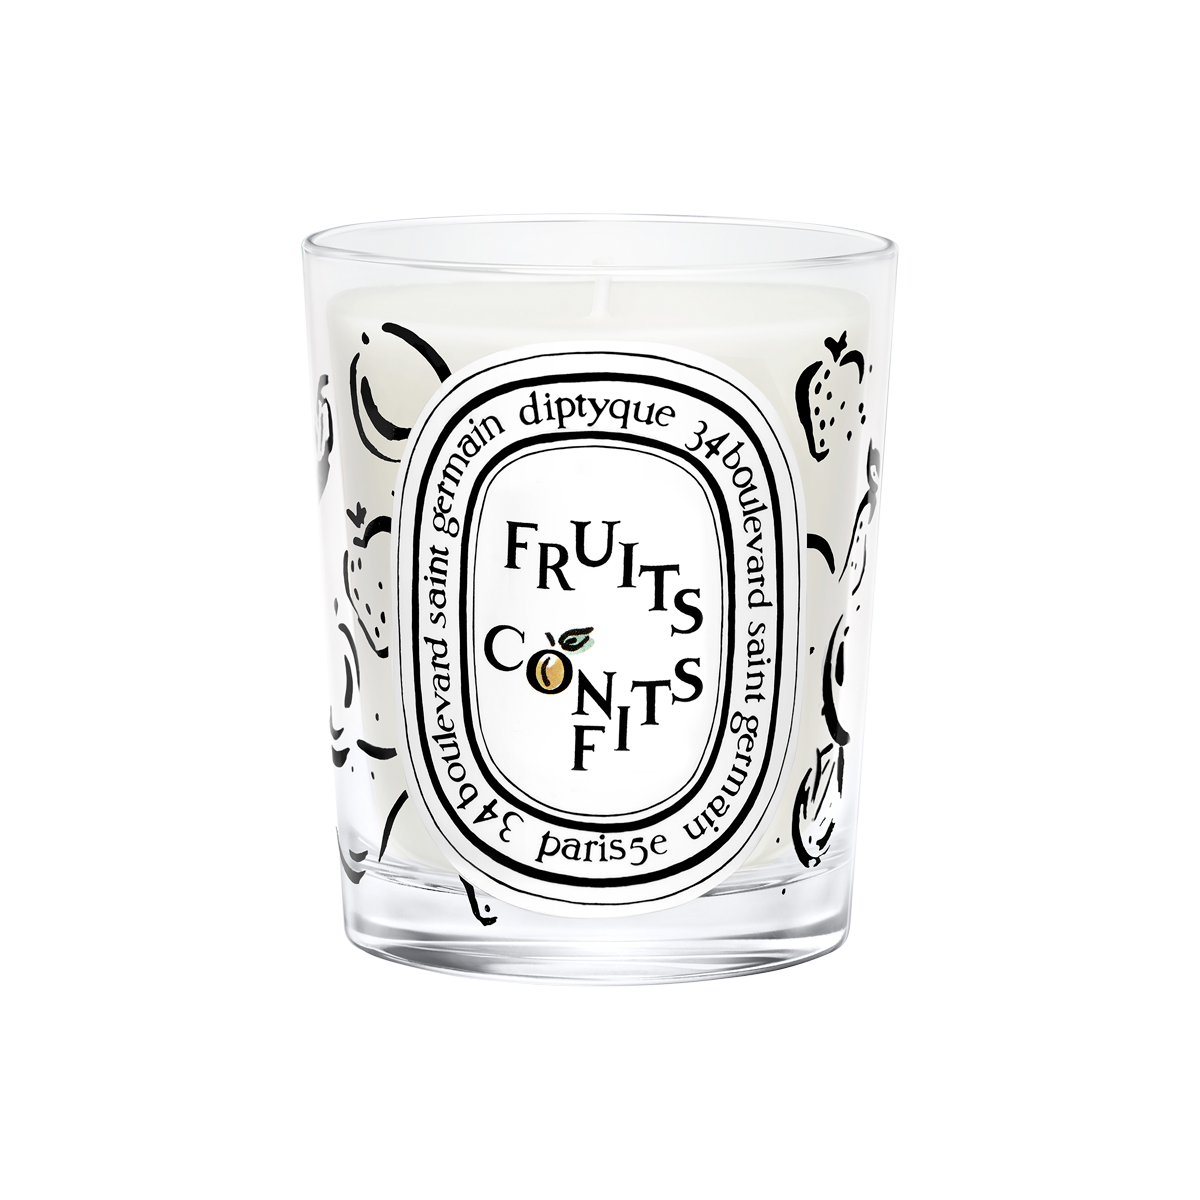 Diptyque - Scented Classic Candle Fruits Confits